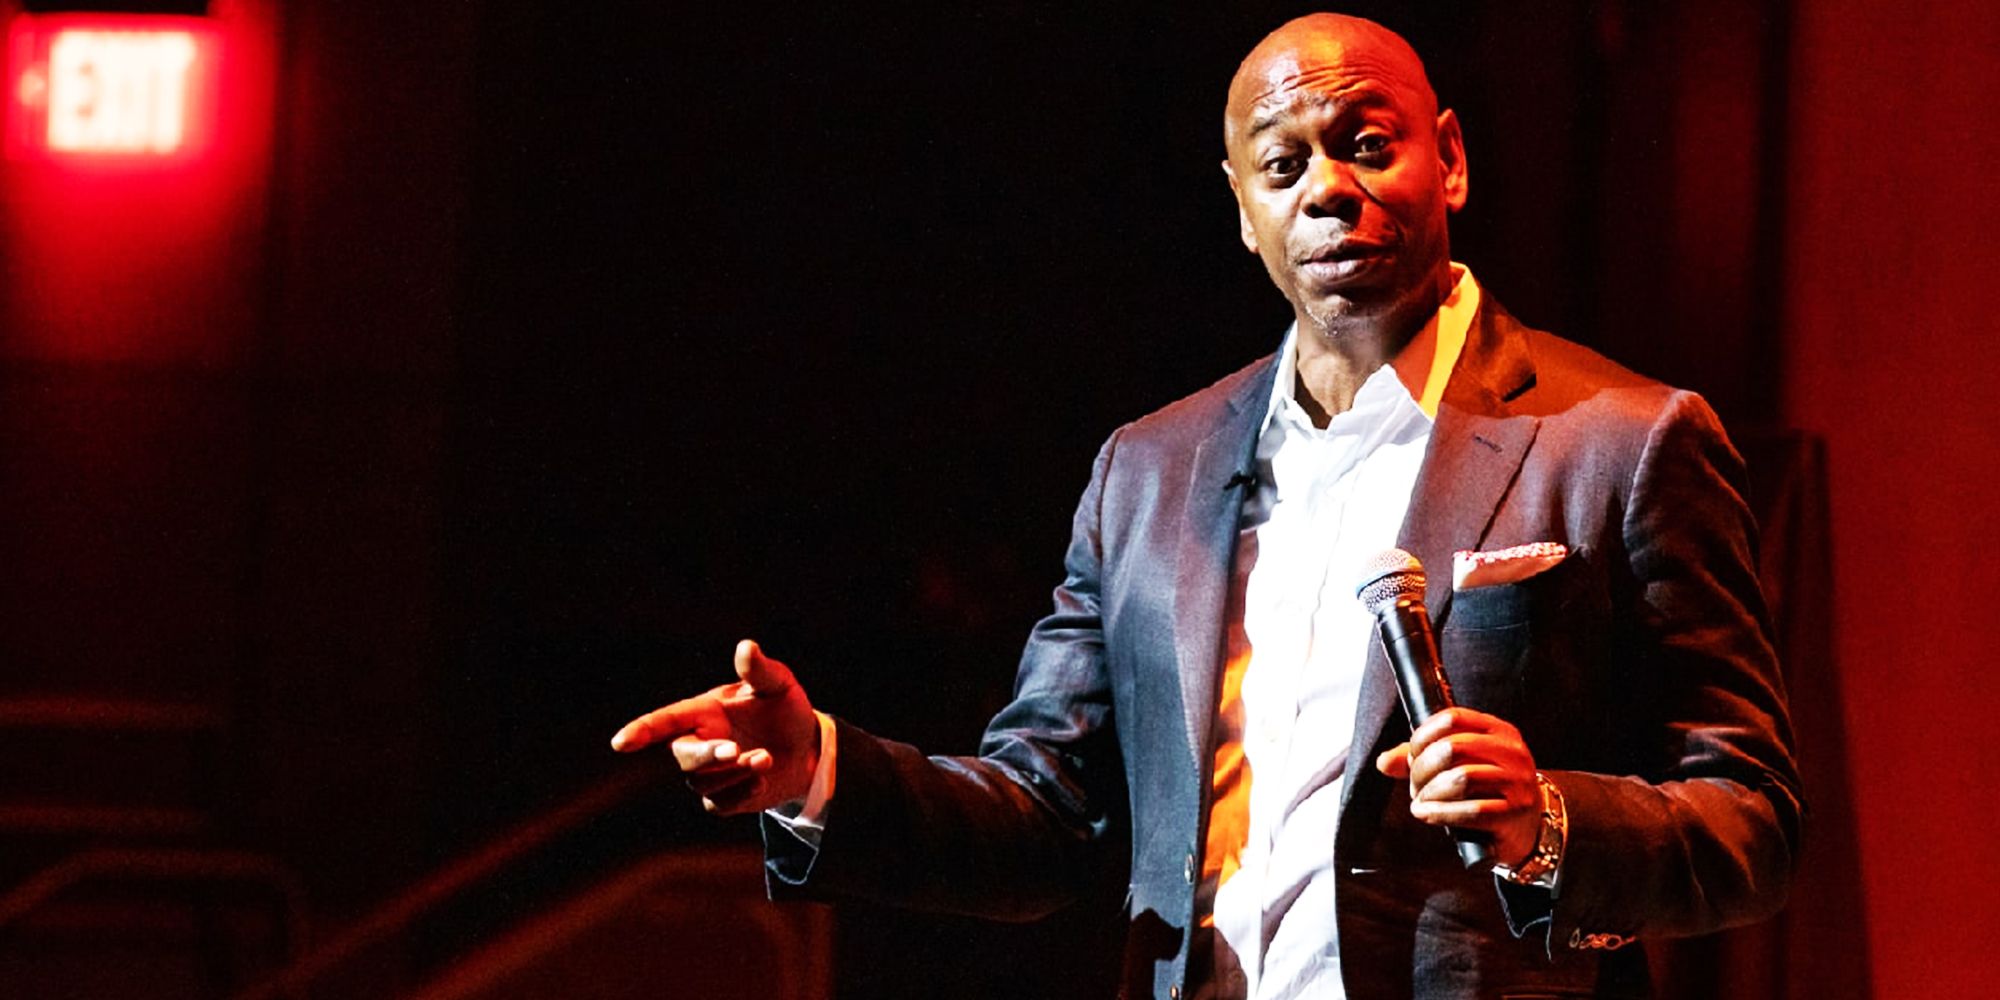 Dave Chappelle stands up